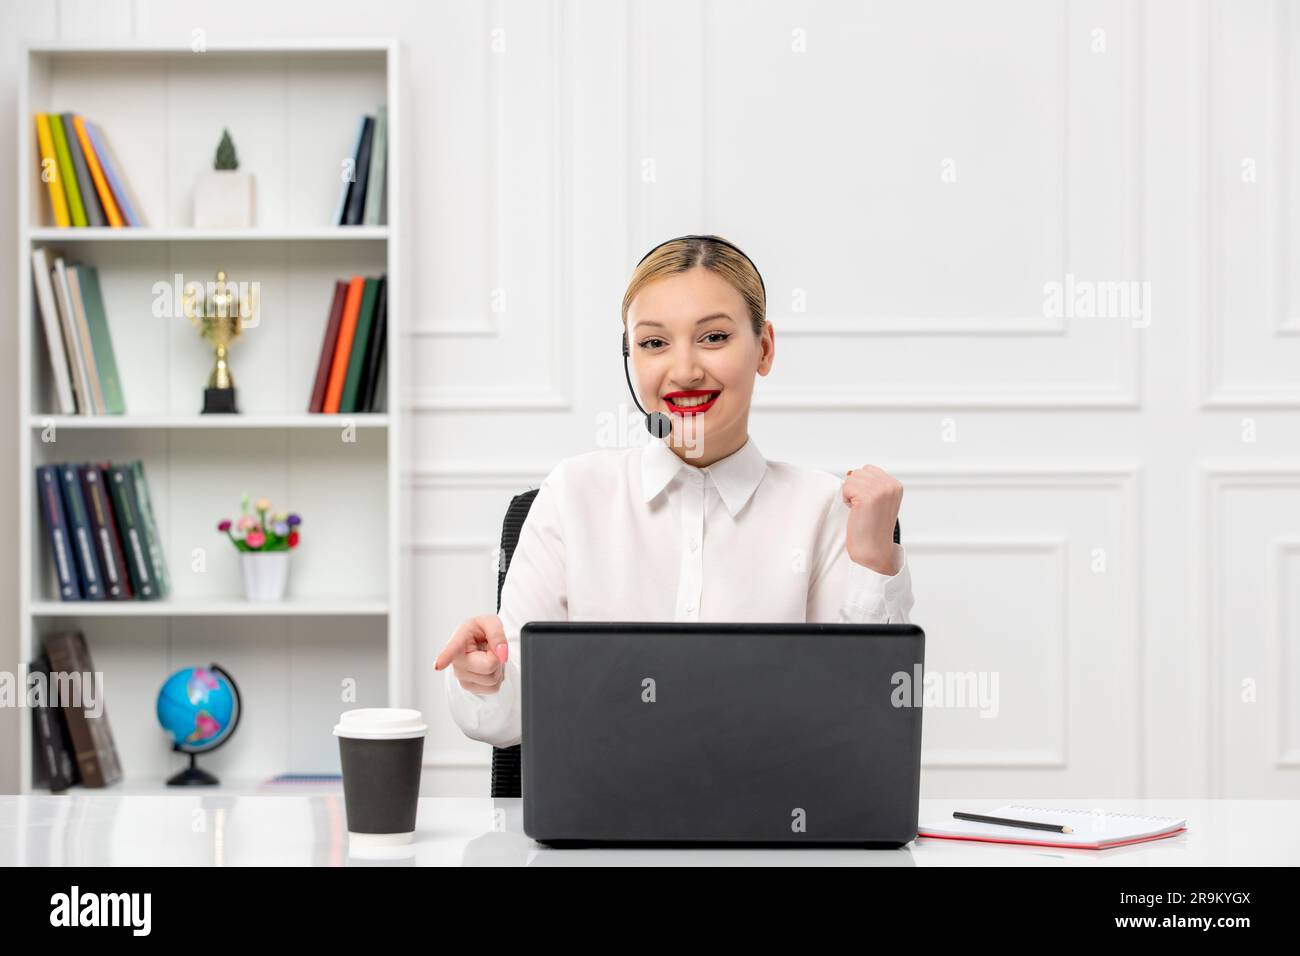 customer service cute blonde girl office shirt with headset and computer holding fists up Stock Photo